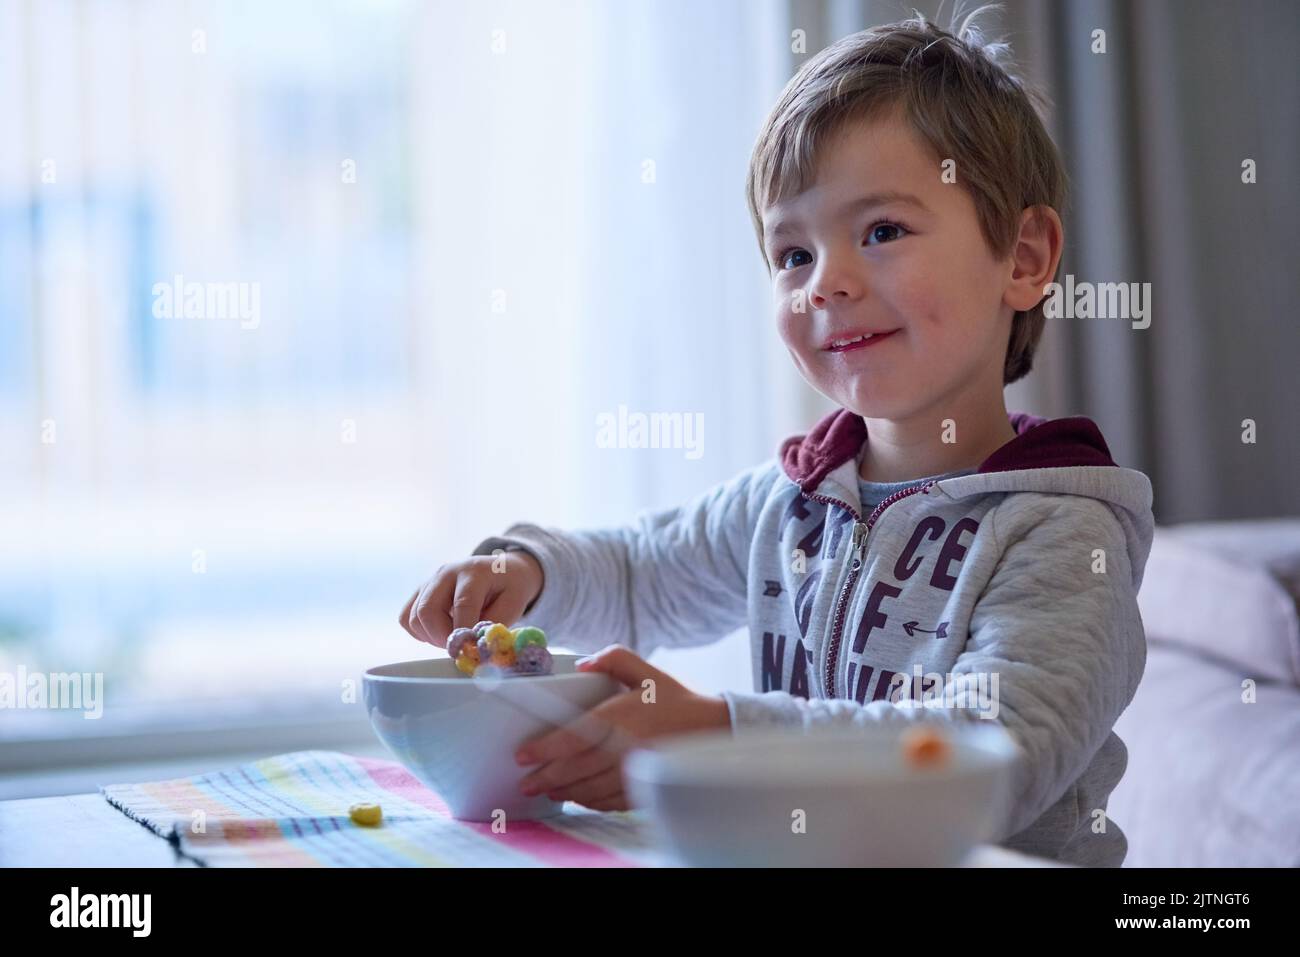 Its really yummy. a little boy eating breakfast at home. Stock Photo